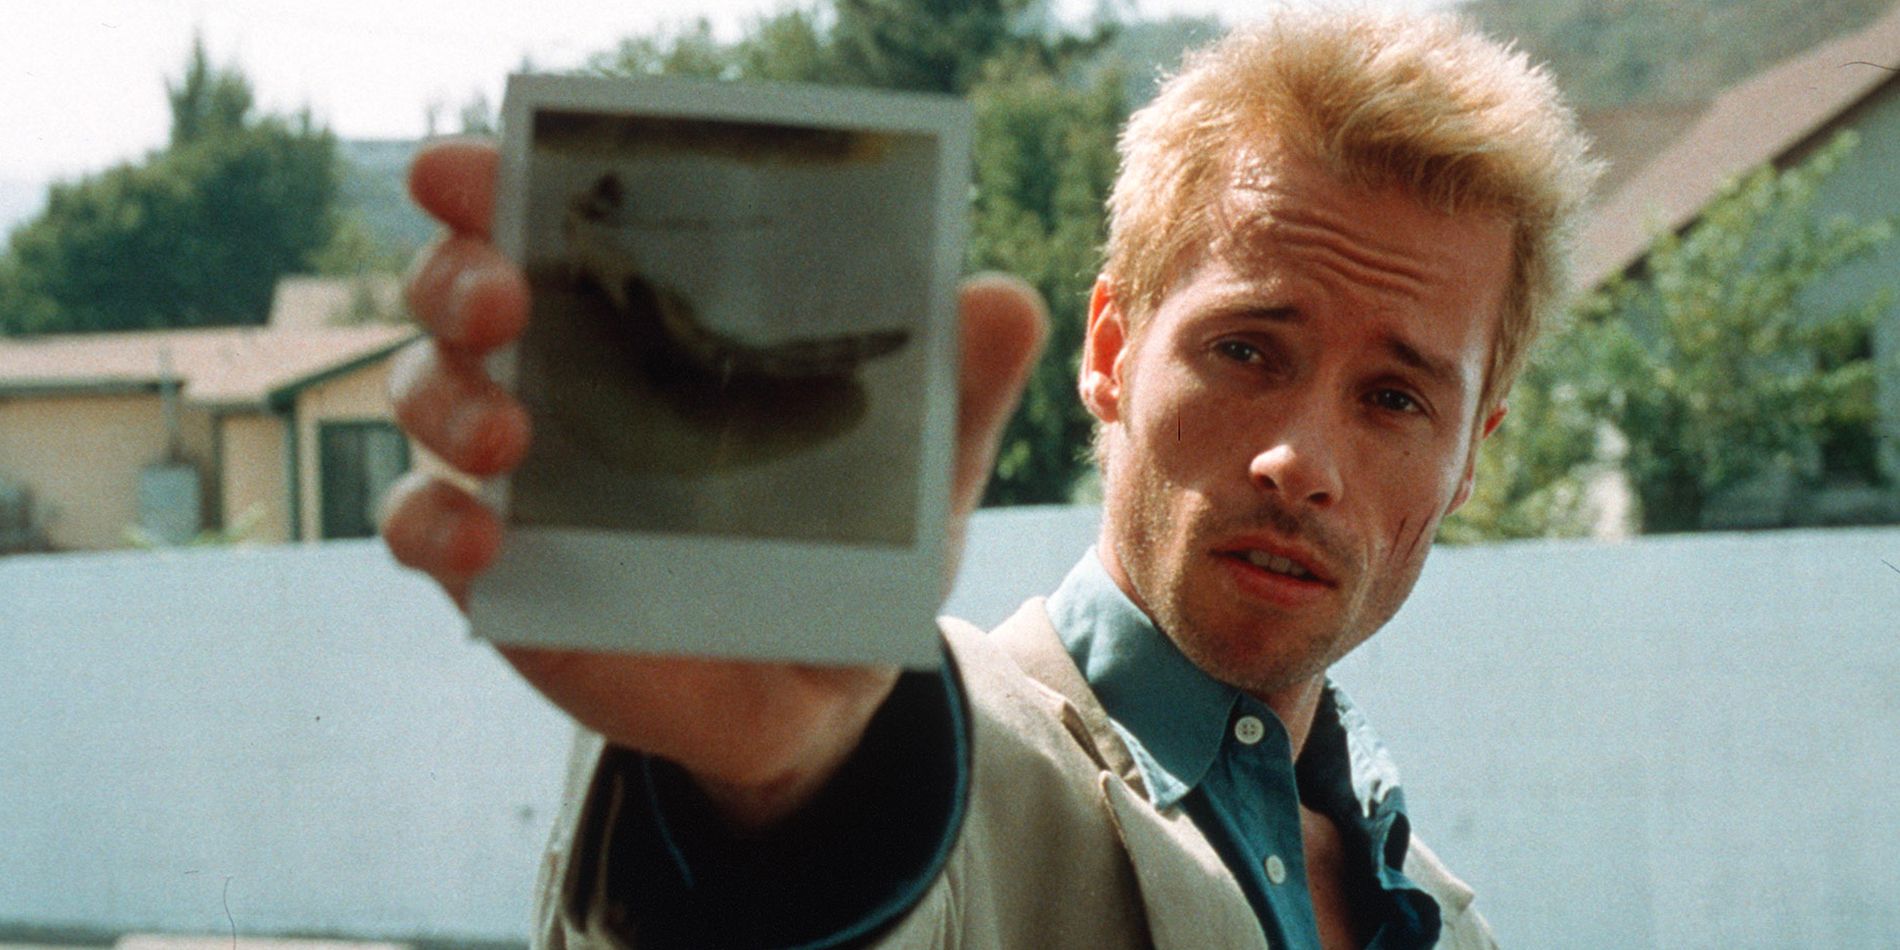 Leonard Shelby (Guy Pearce) questions someone about a photograph of a car in 'Memento'.